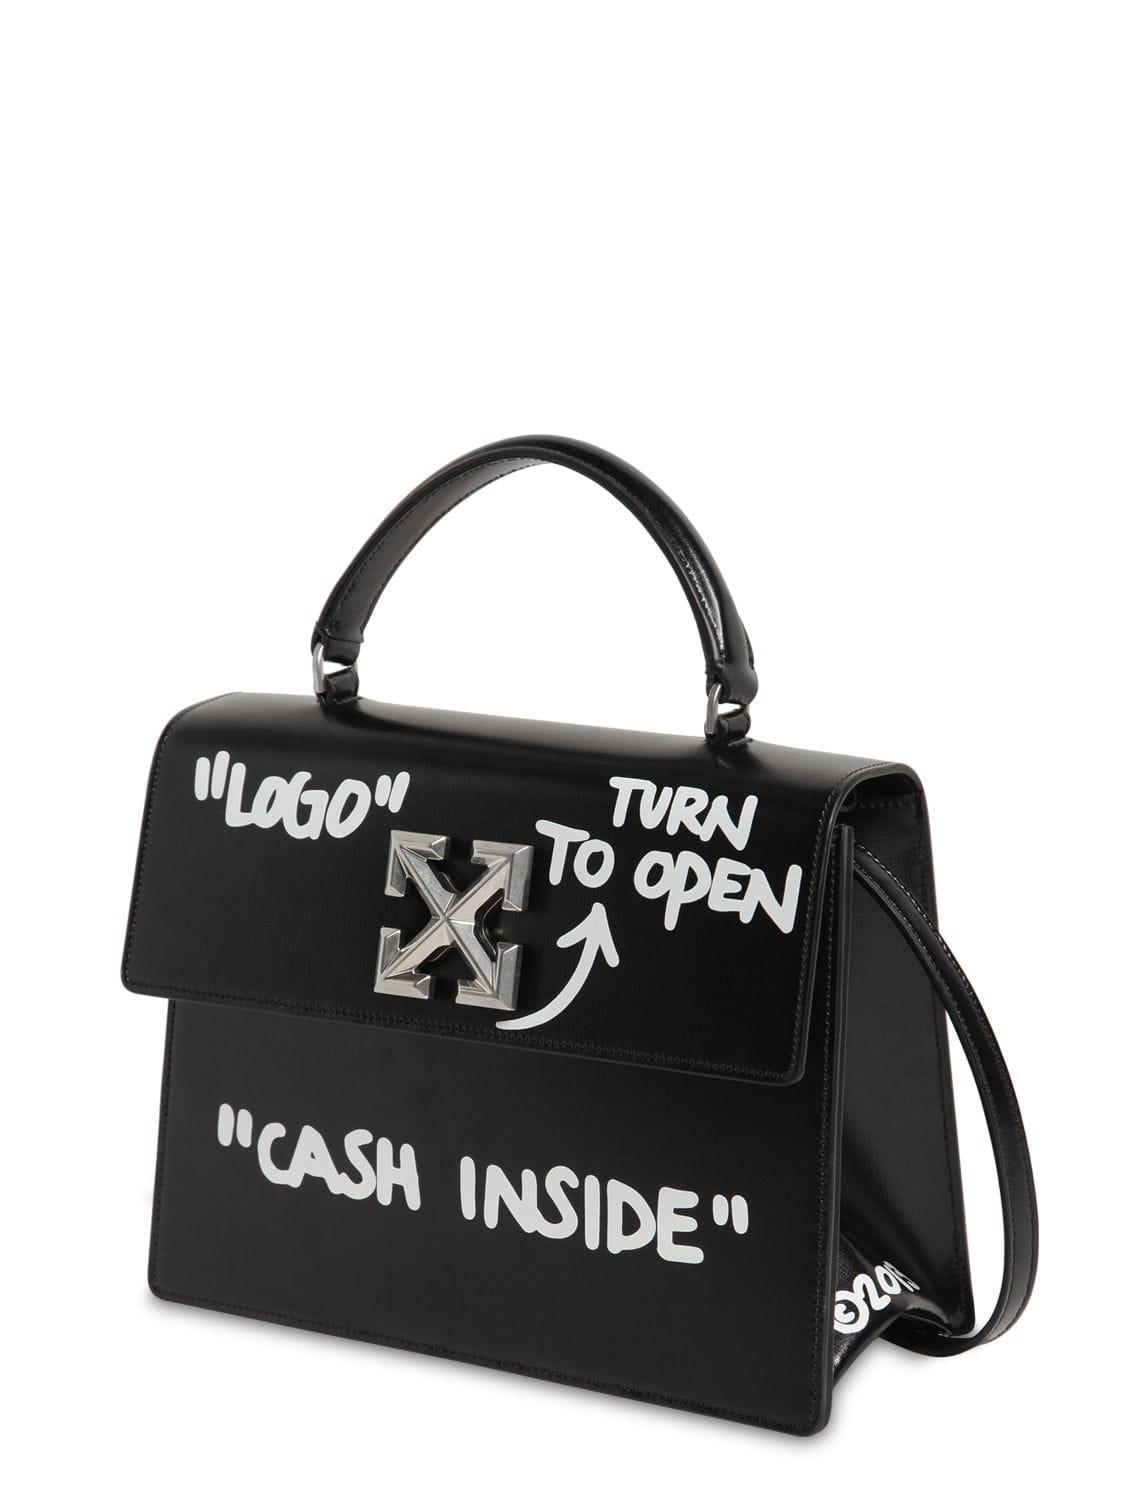 dishonest pierce Therapy Off-White c/o Virgil Abloh Leather Itney 1.4 Cash Inside Bag in Black | Lyst